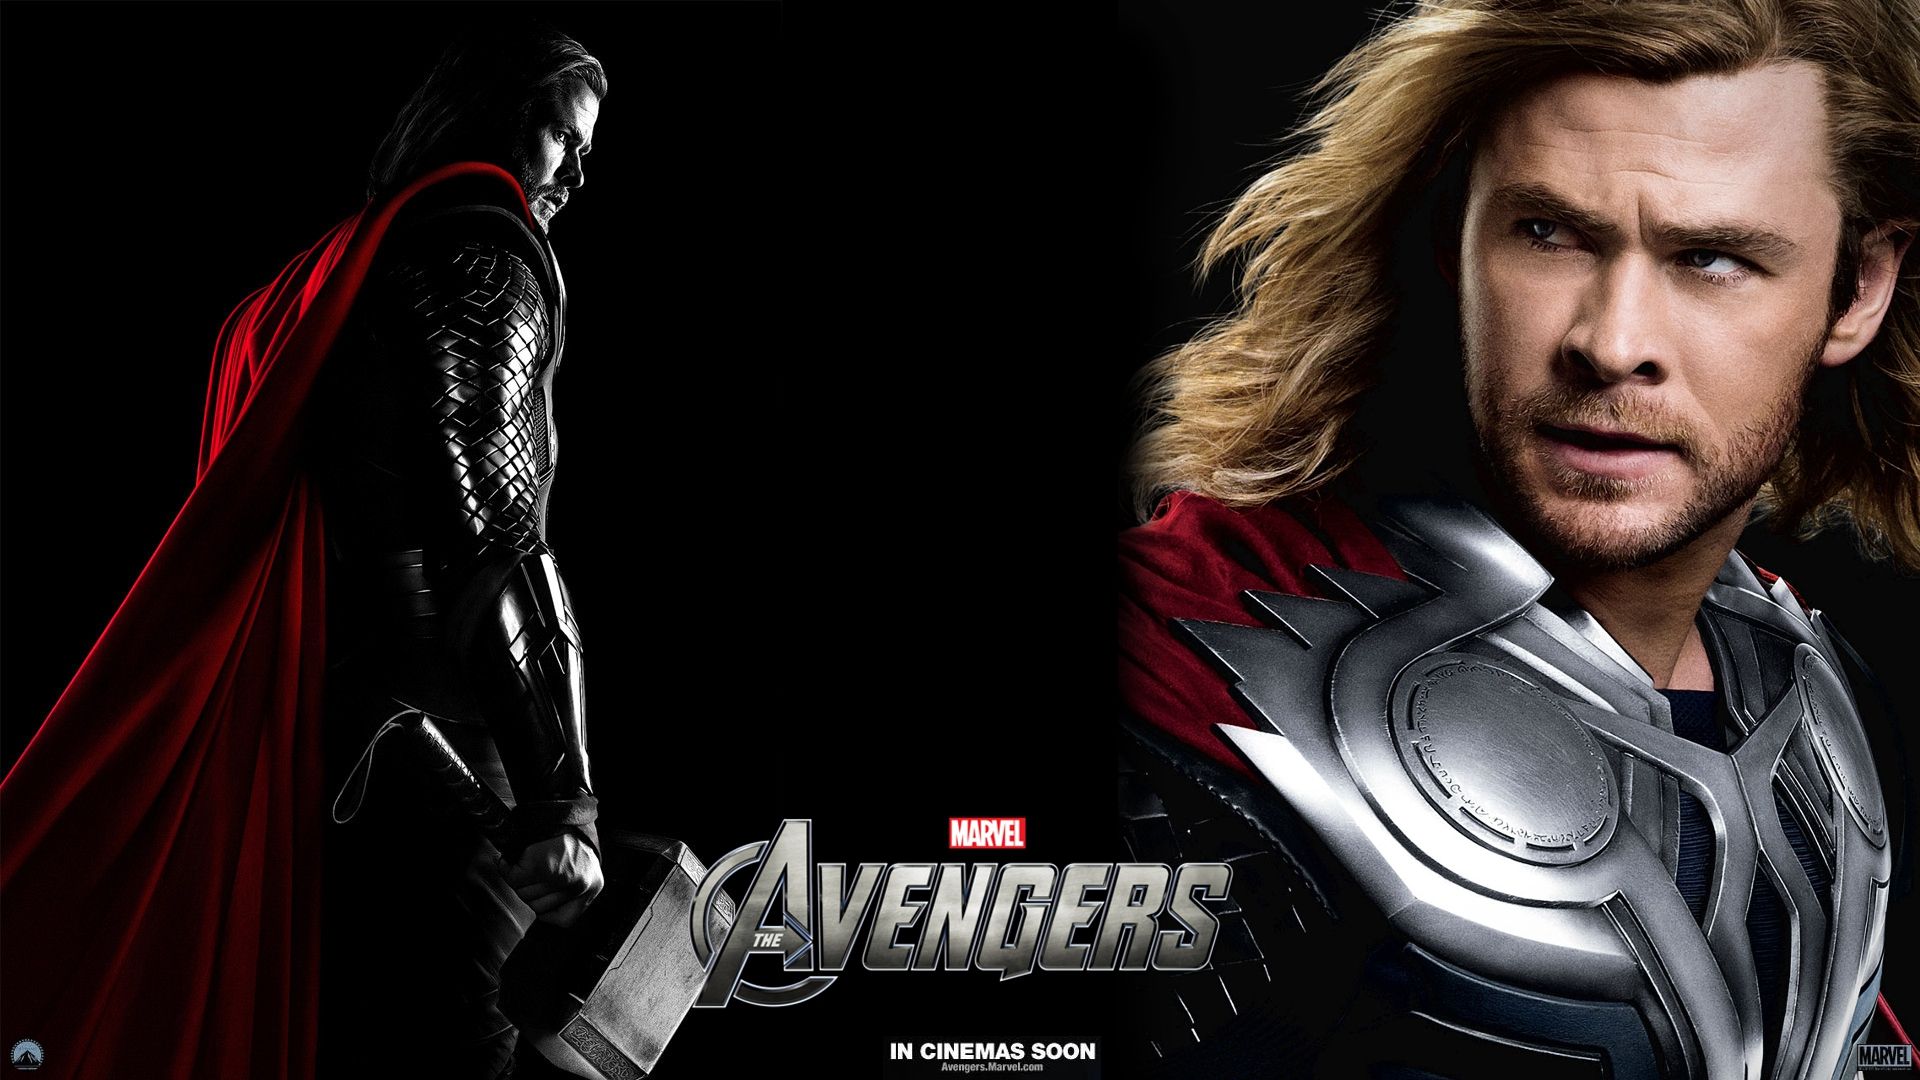 Thor Wallpaper Backgrounds 4737 - HD Wallpapers Site